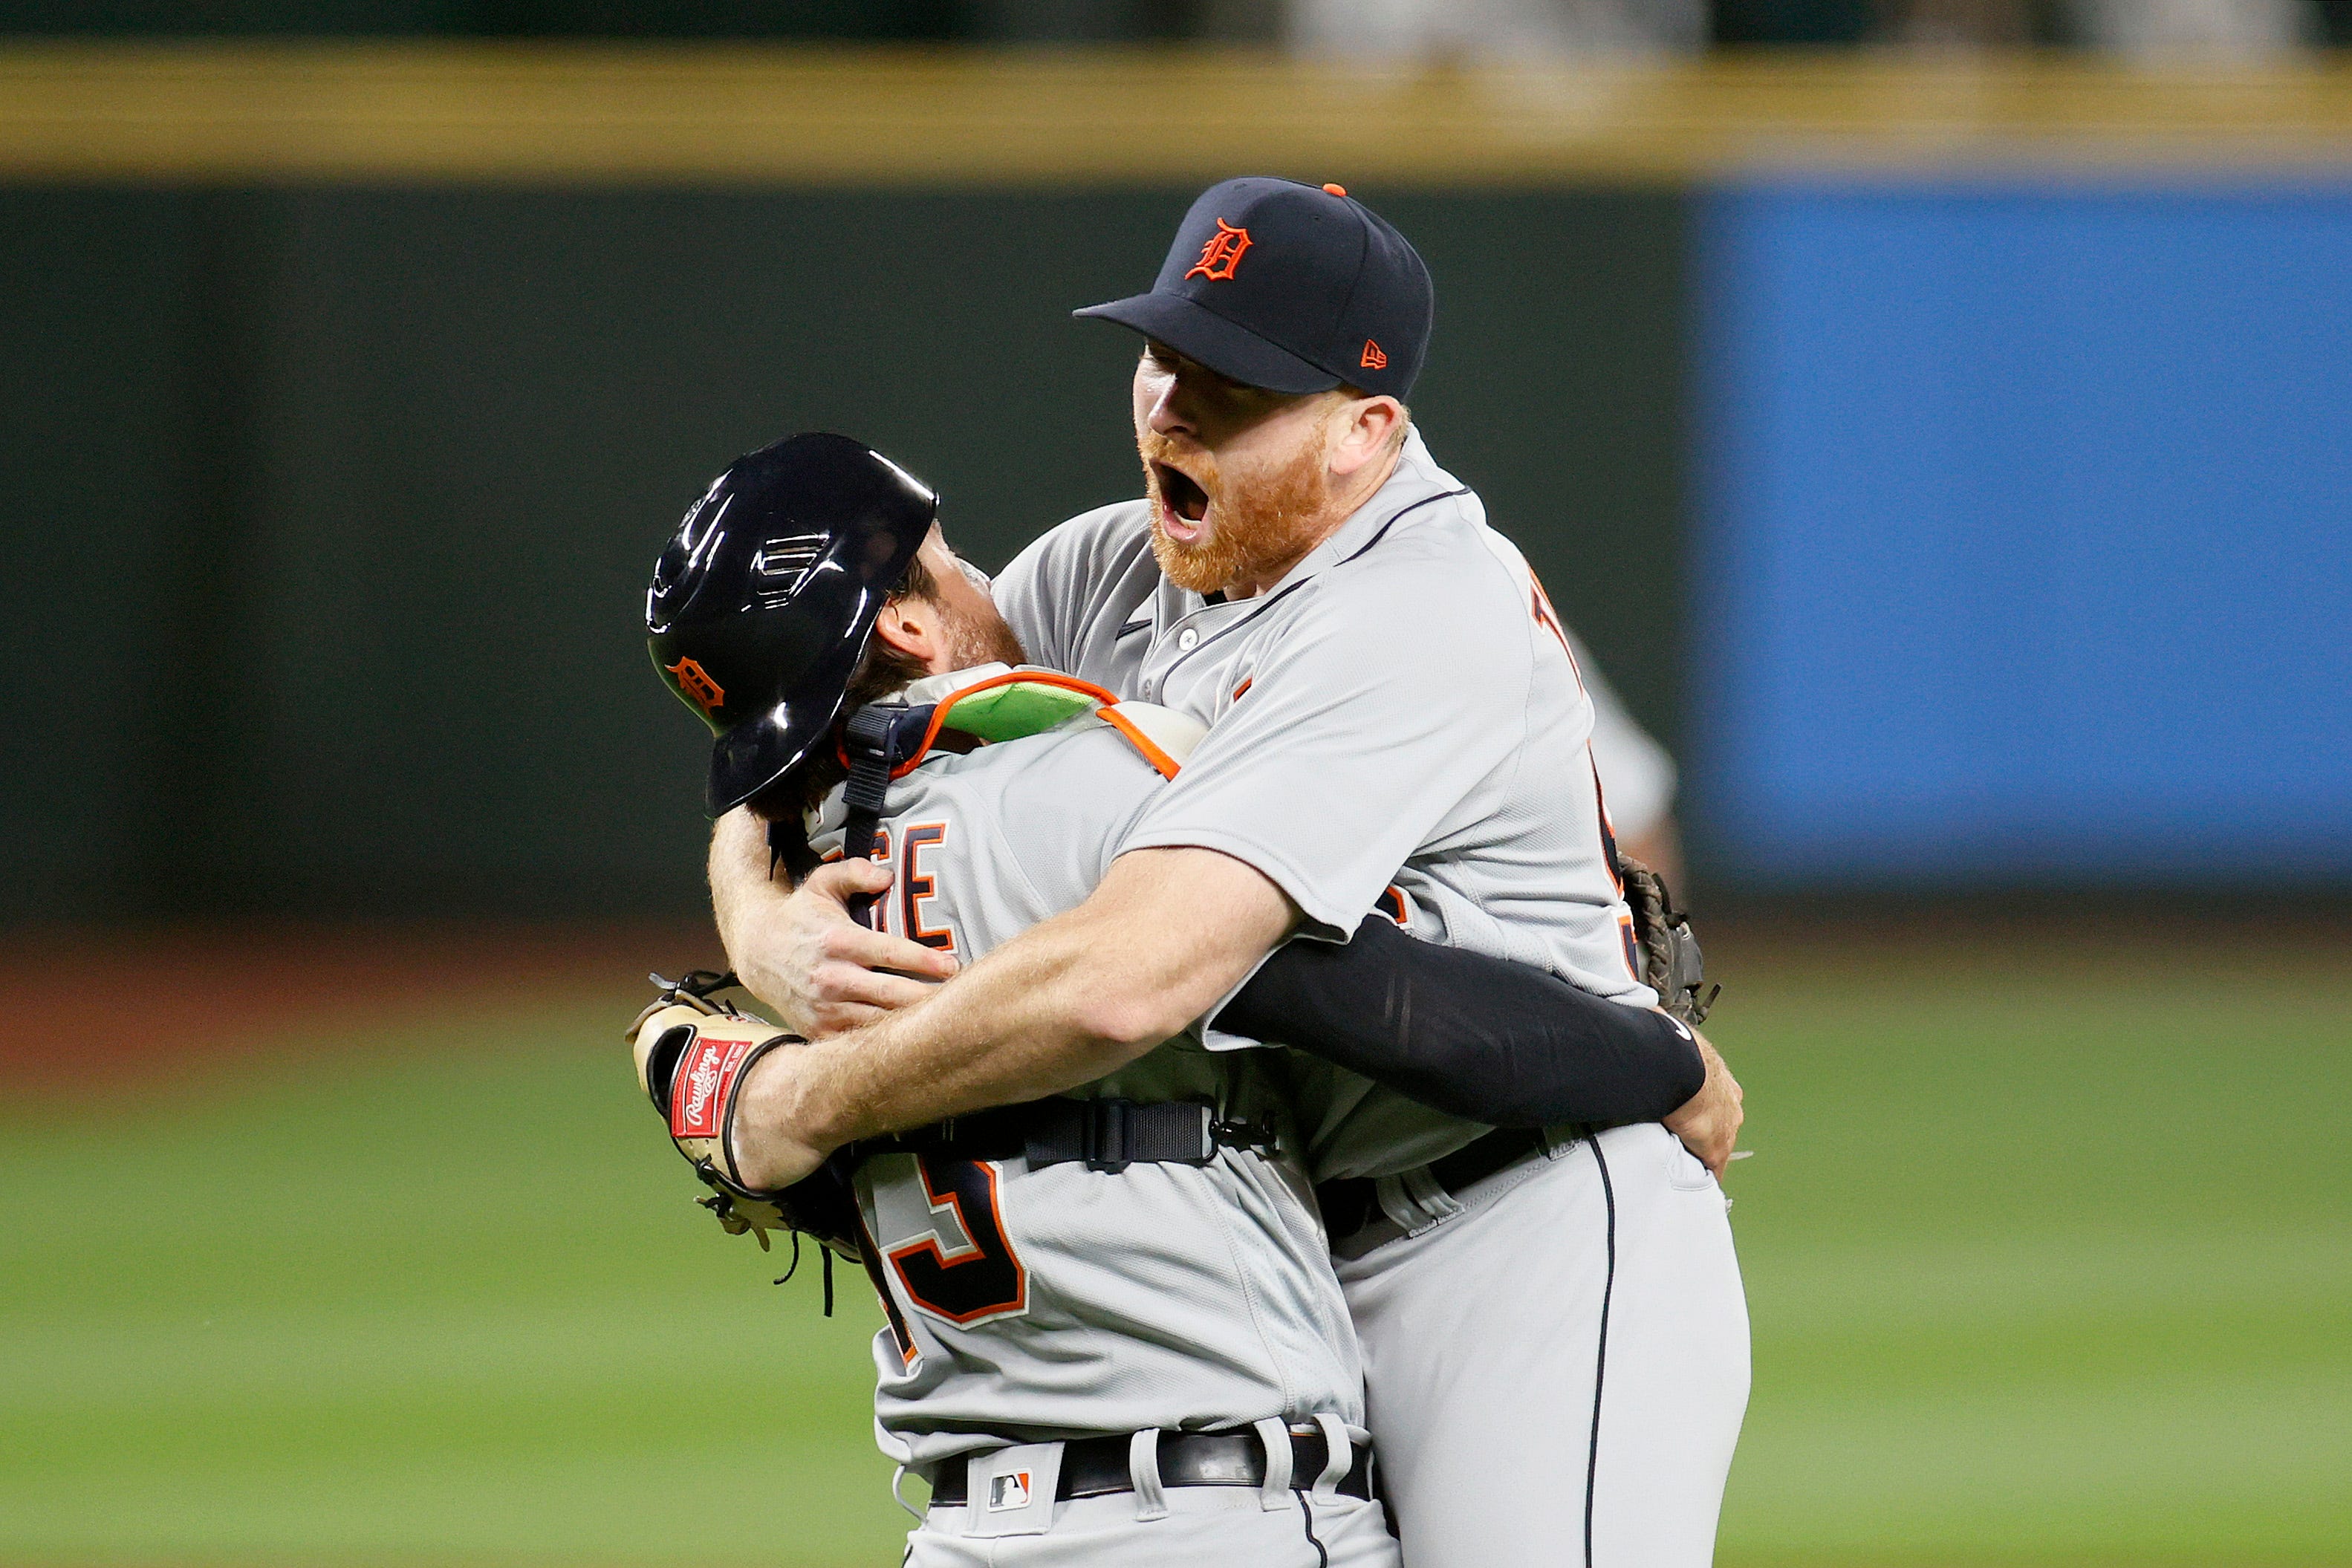 Spencer Turnbull (56) and Eric Haase (13) of the Detroit Tigers celebrate after Turnbull's no-hitter against the Seattle Mariners at T-Mobile Park on May 18, 2021 in Seattle.